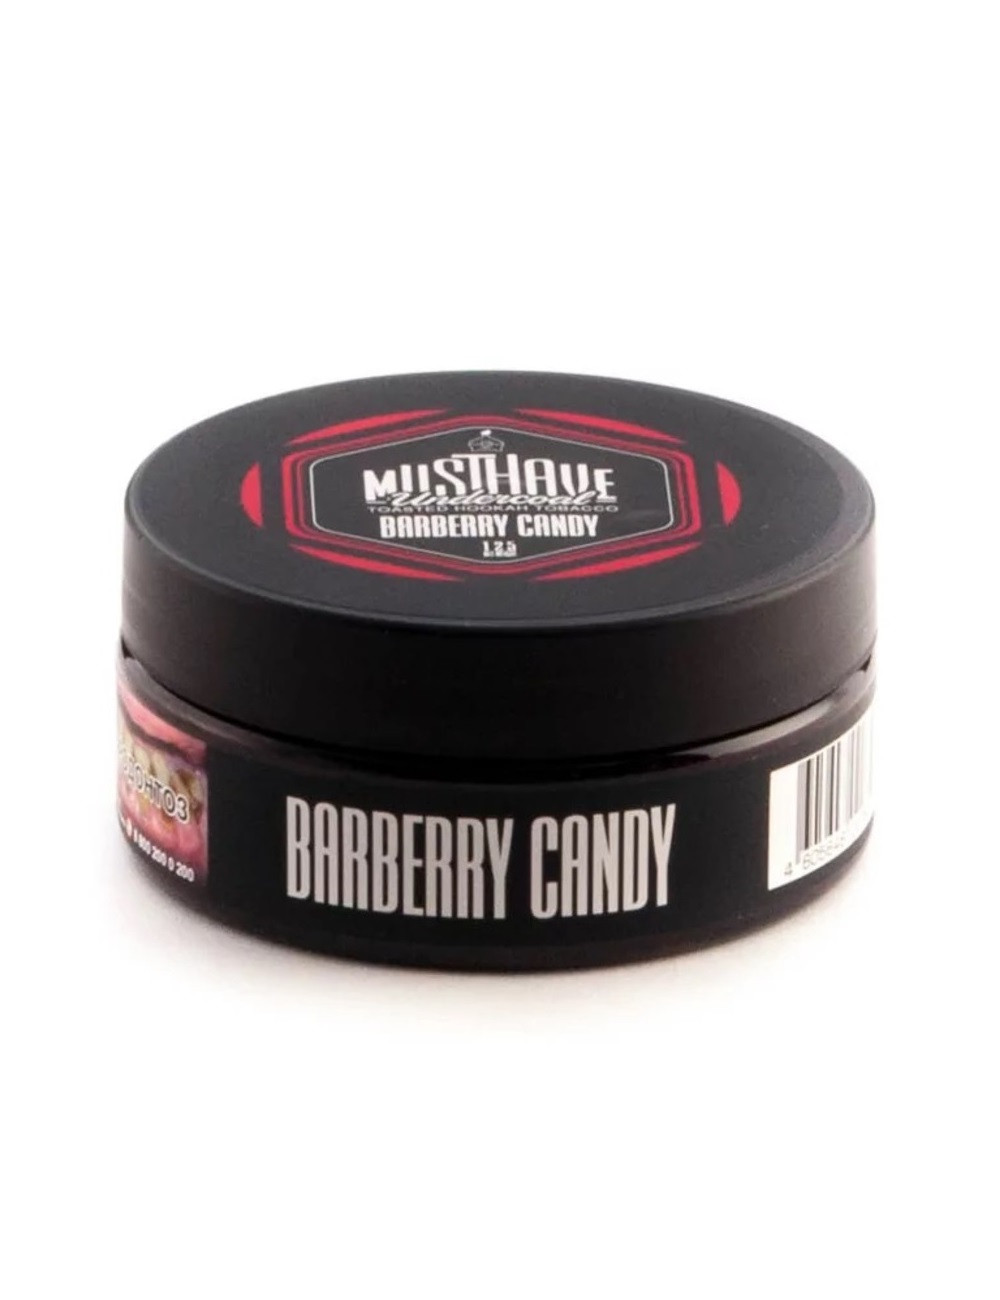 Barberry candy